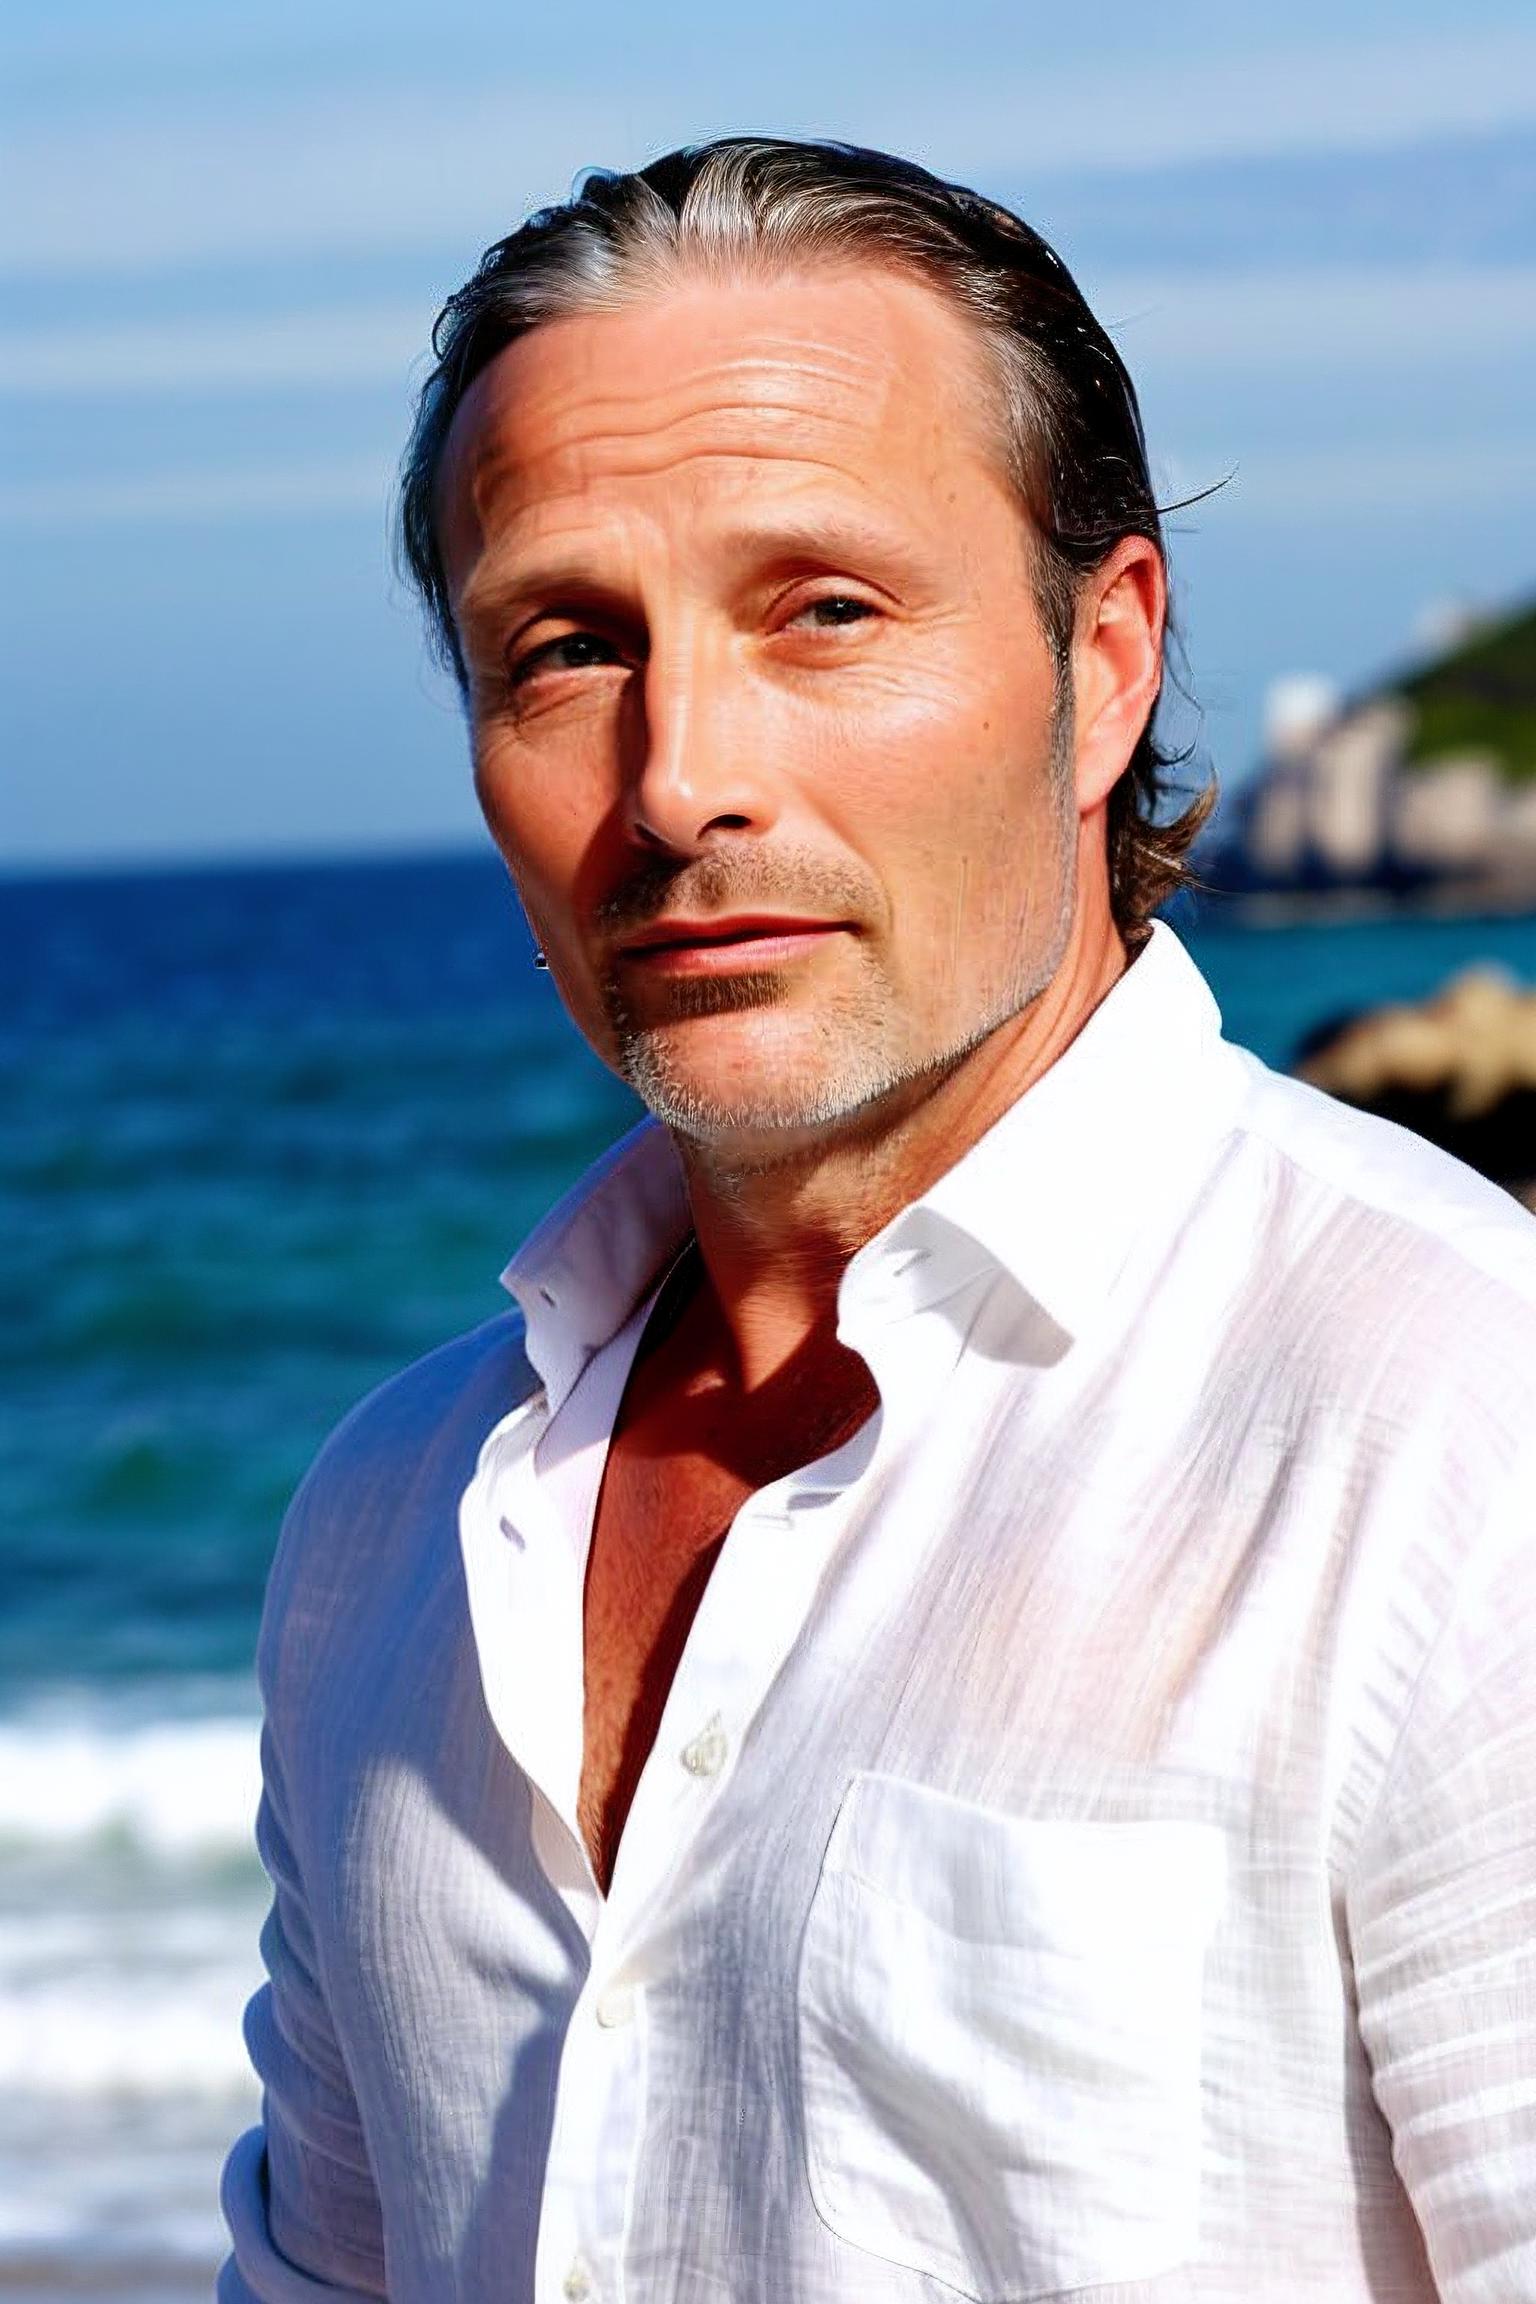 A man with a beard and wavy hair, wearing a white shirt and standing next to the ocean.